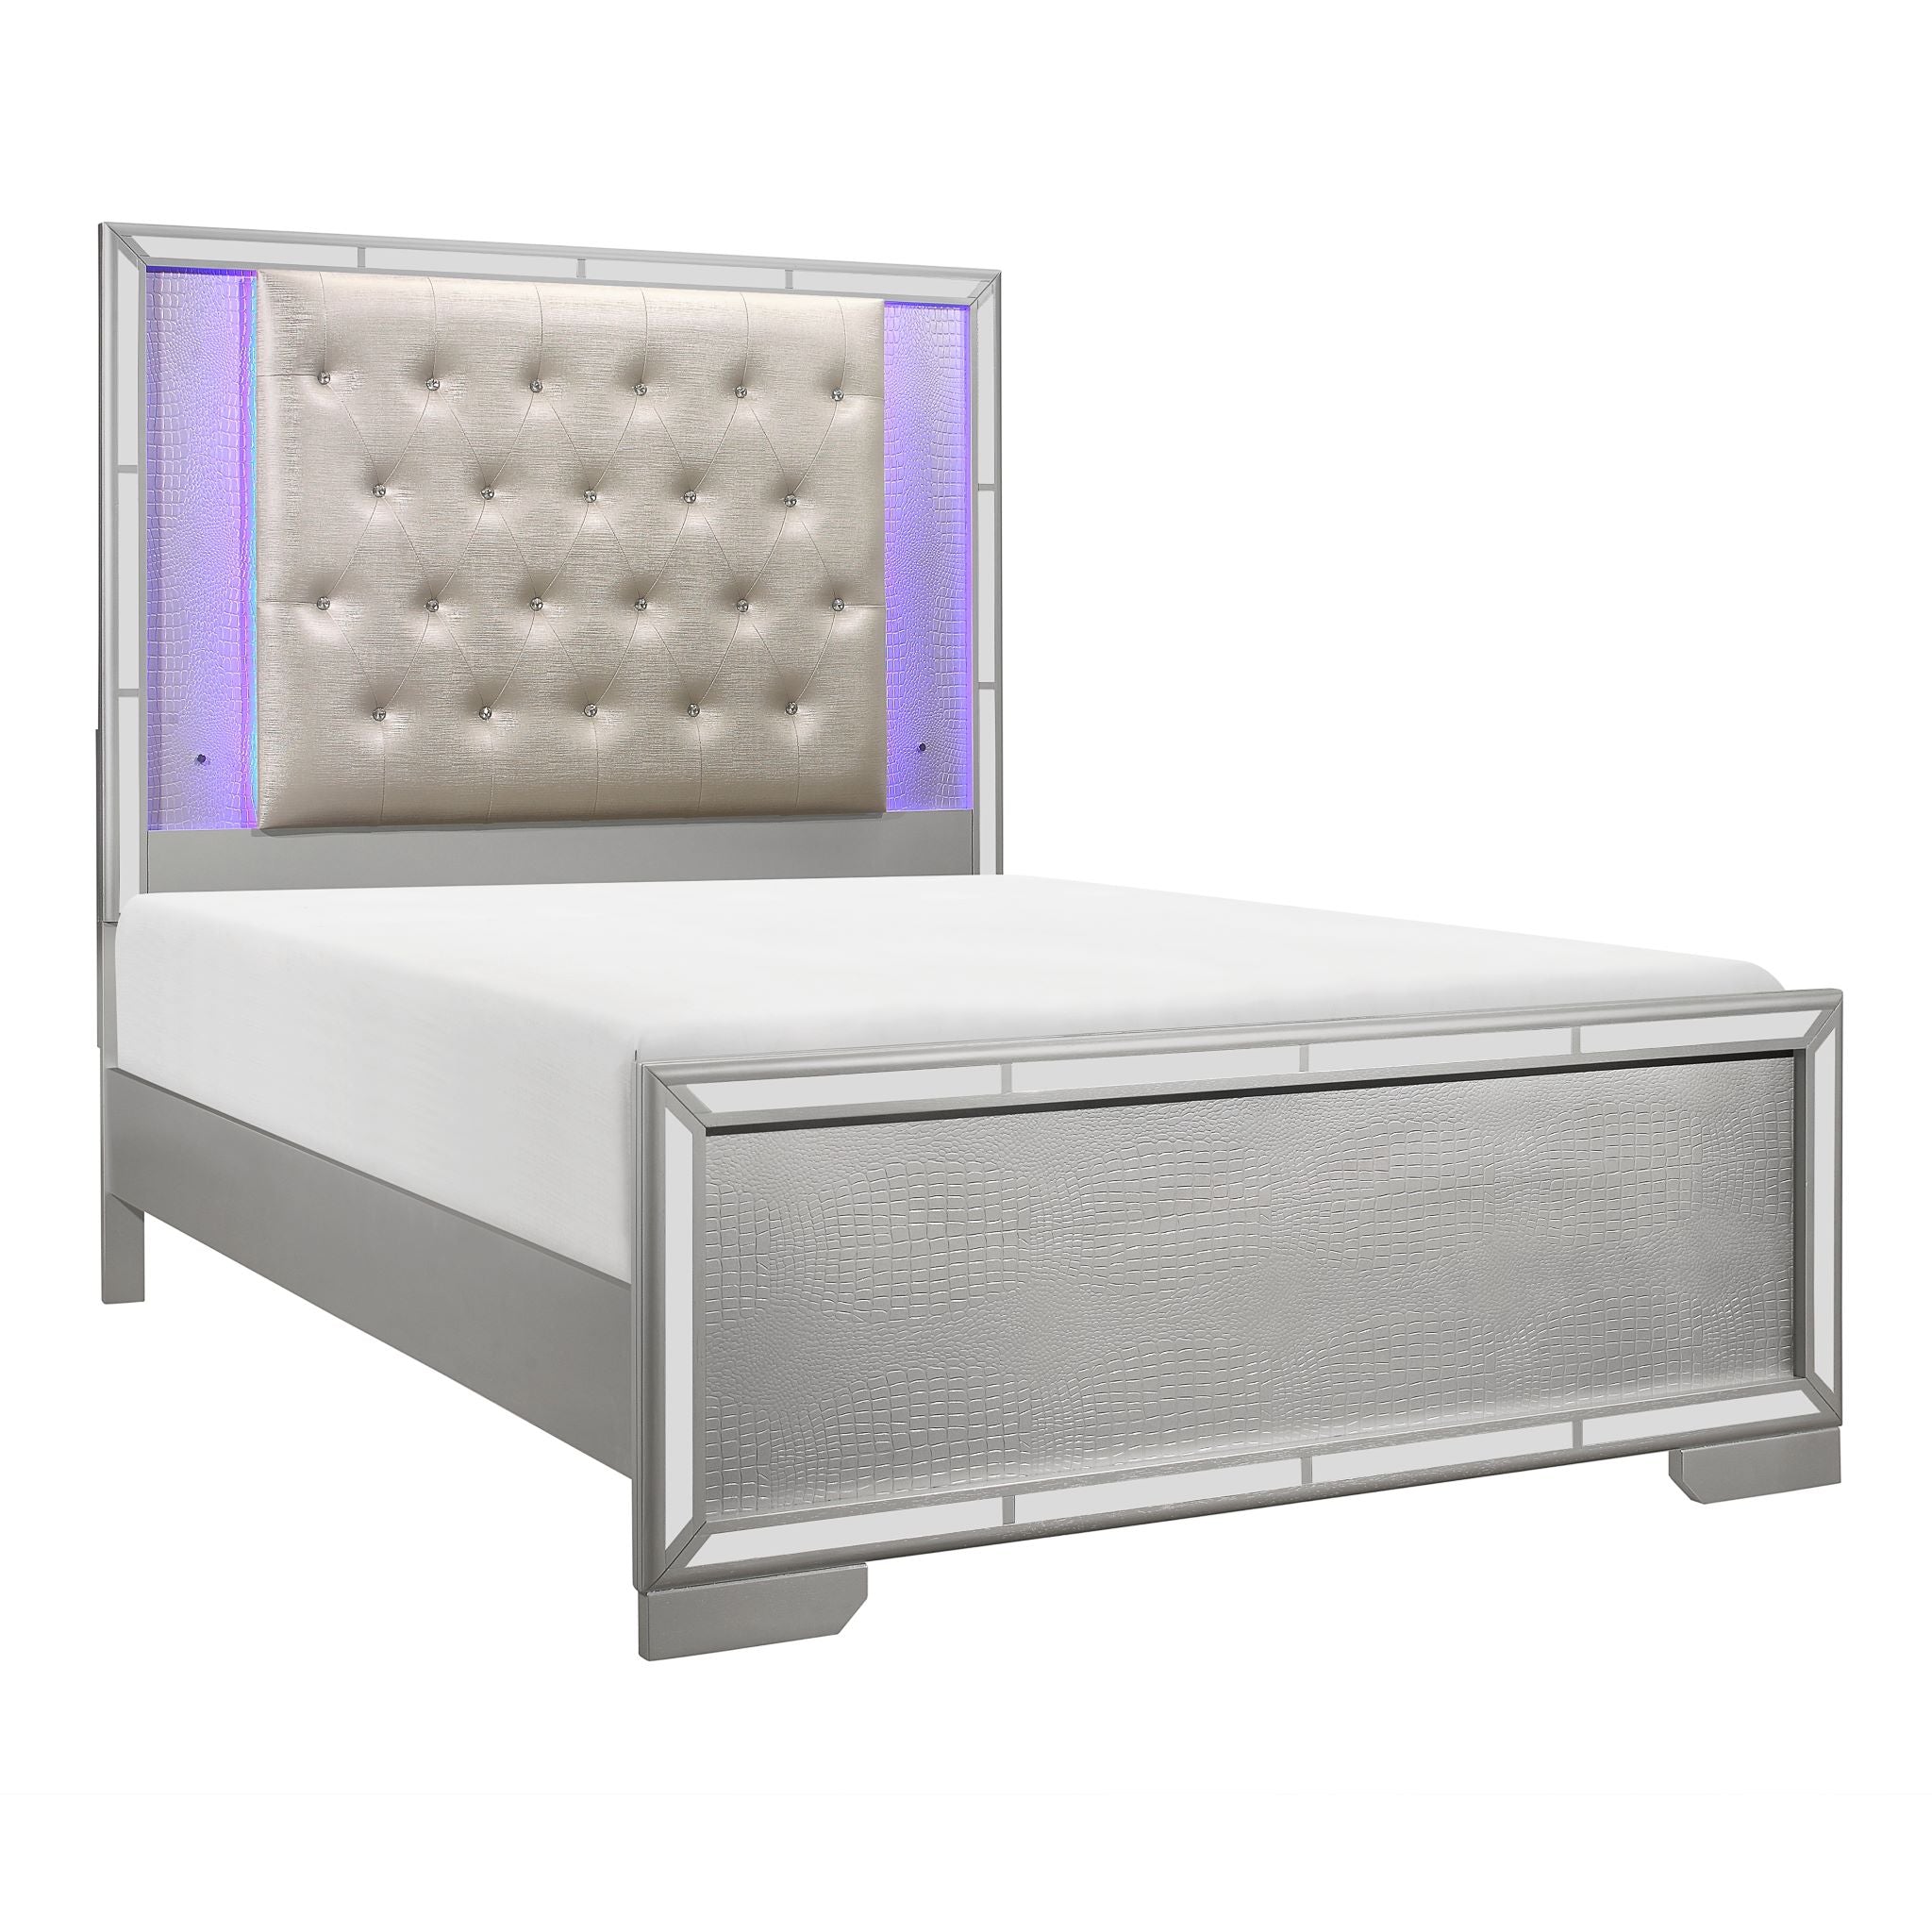 Silver Aveline Bedroom Collection 1428SV